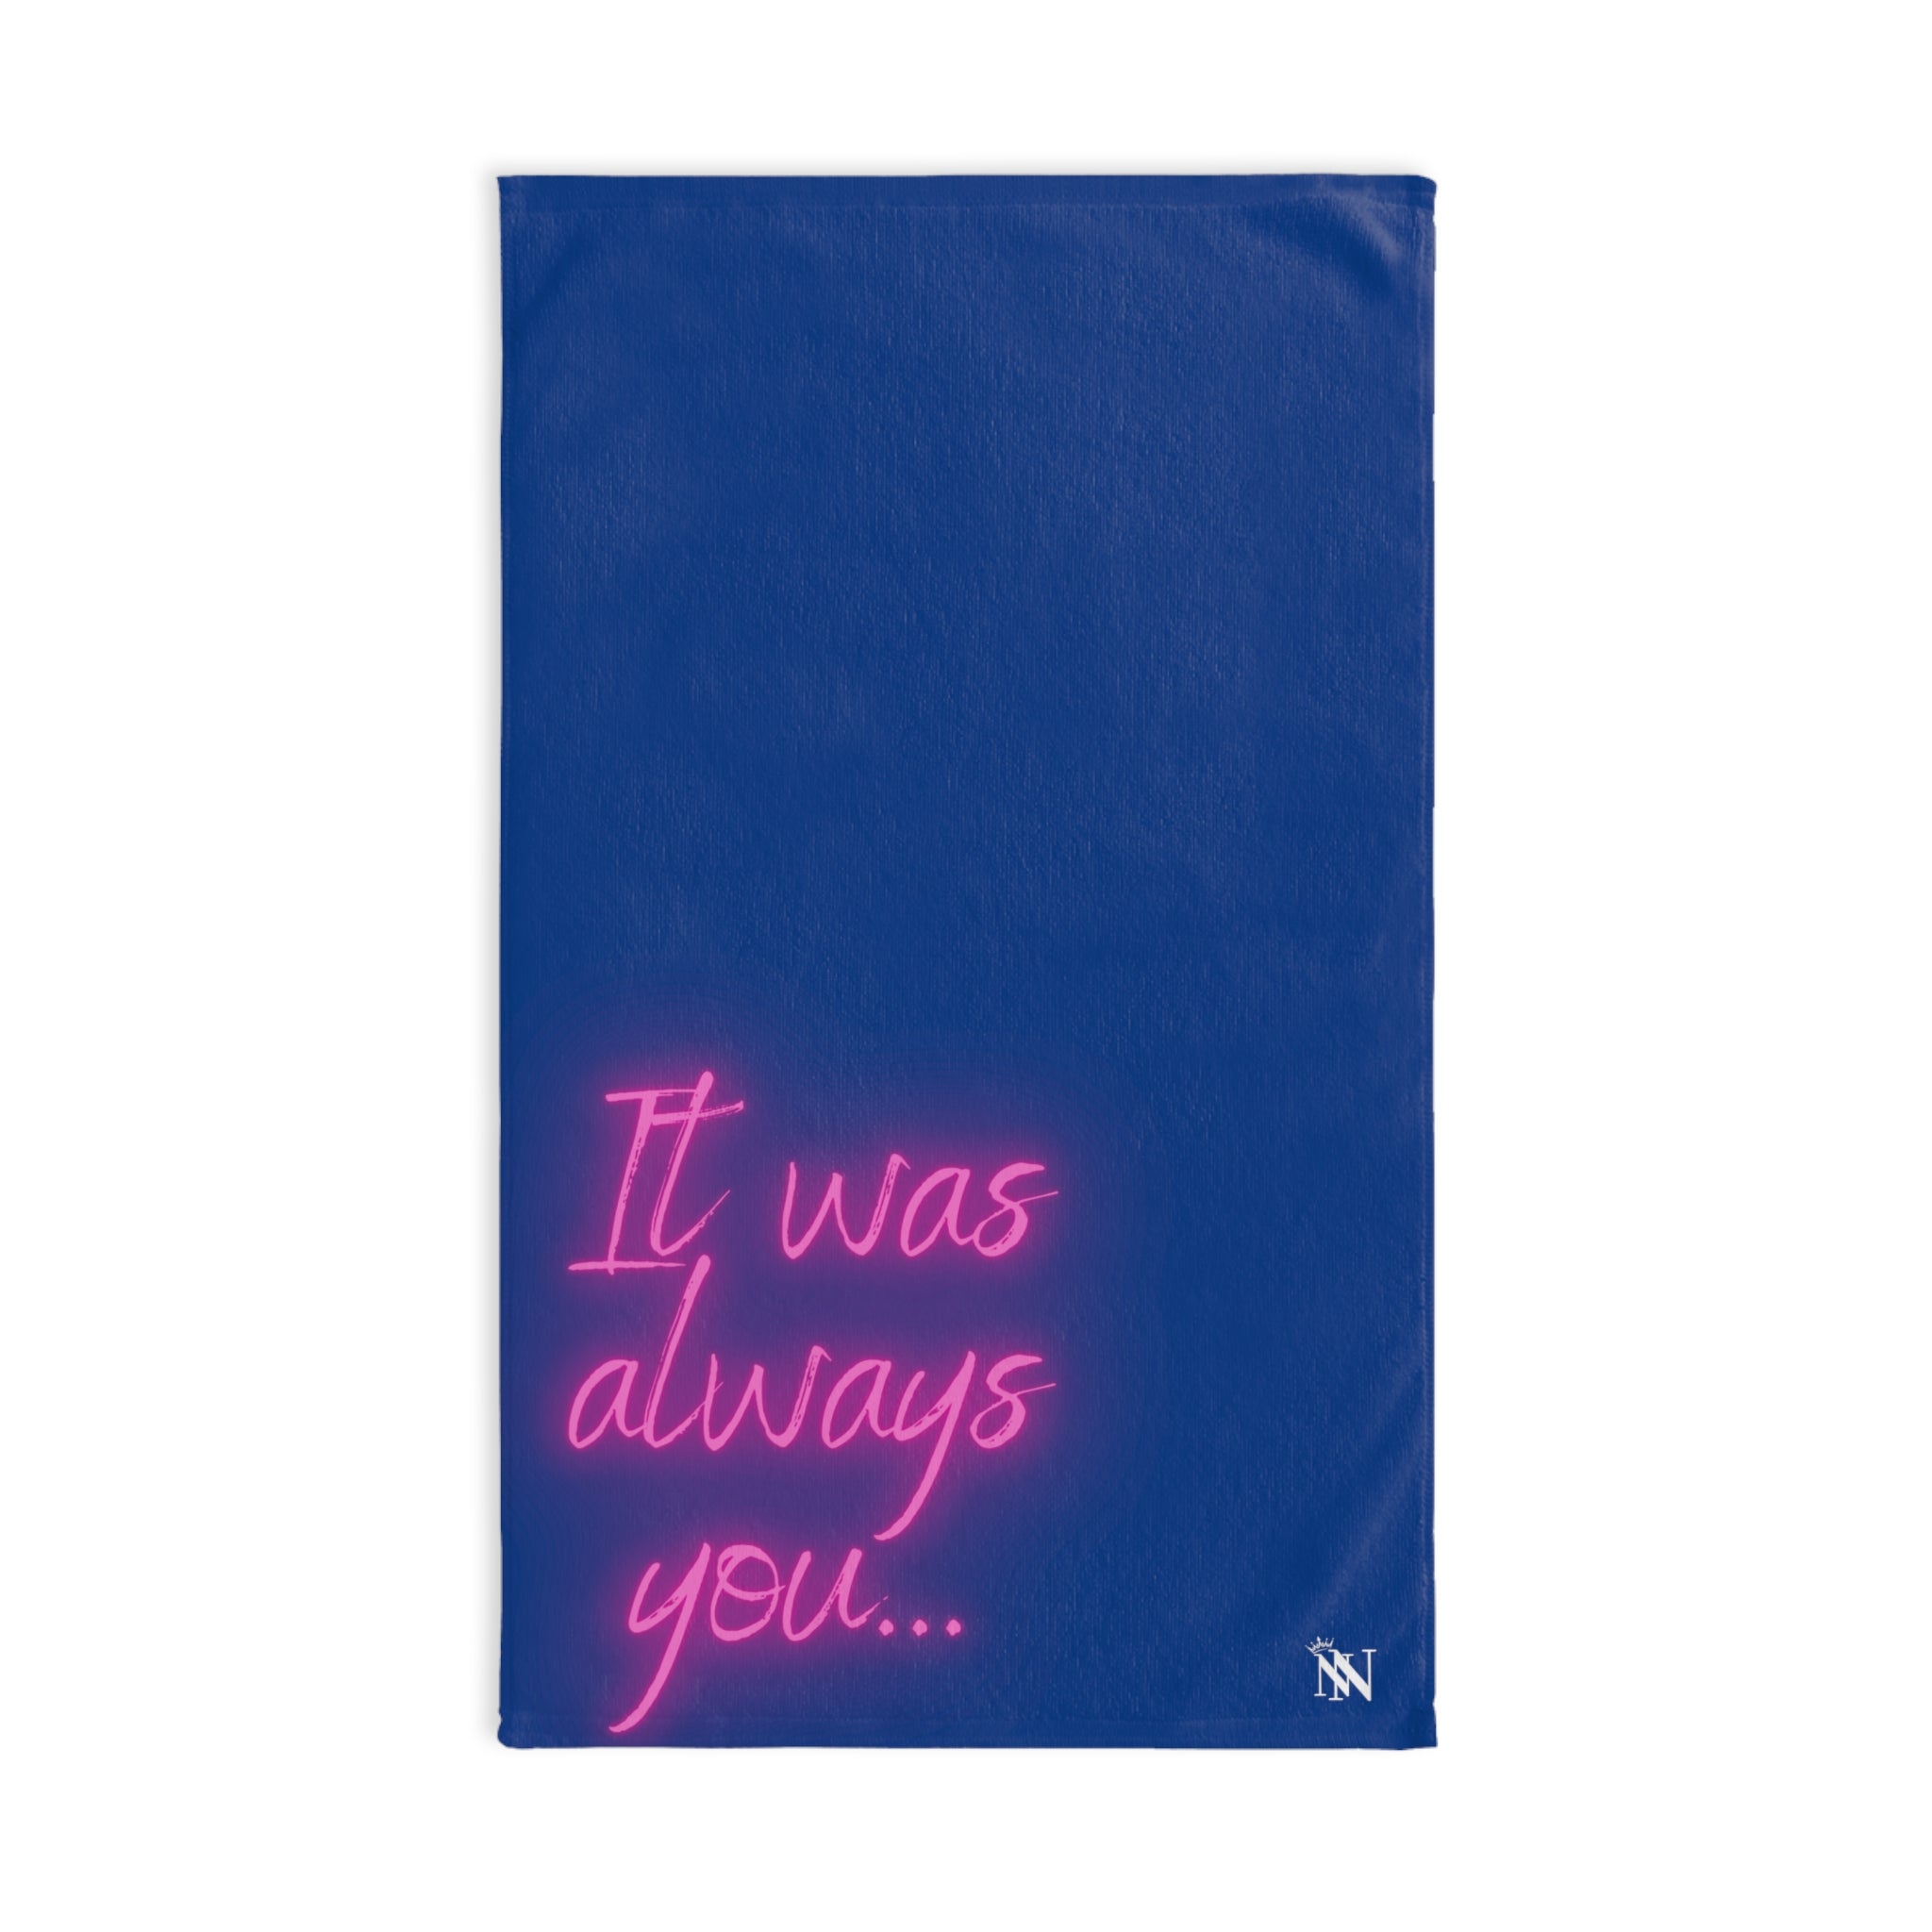 You Always PinkBlue | Gifts for Boyfriend, Funny Towel Romantic Gift for Wedding Couple Fiance First Year Anniversary Valentines, Party Gag Gifts, Joke Humor Cloth for Husband Men BF NECTAR NAPKINS